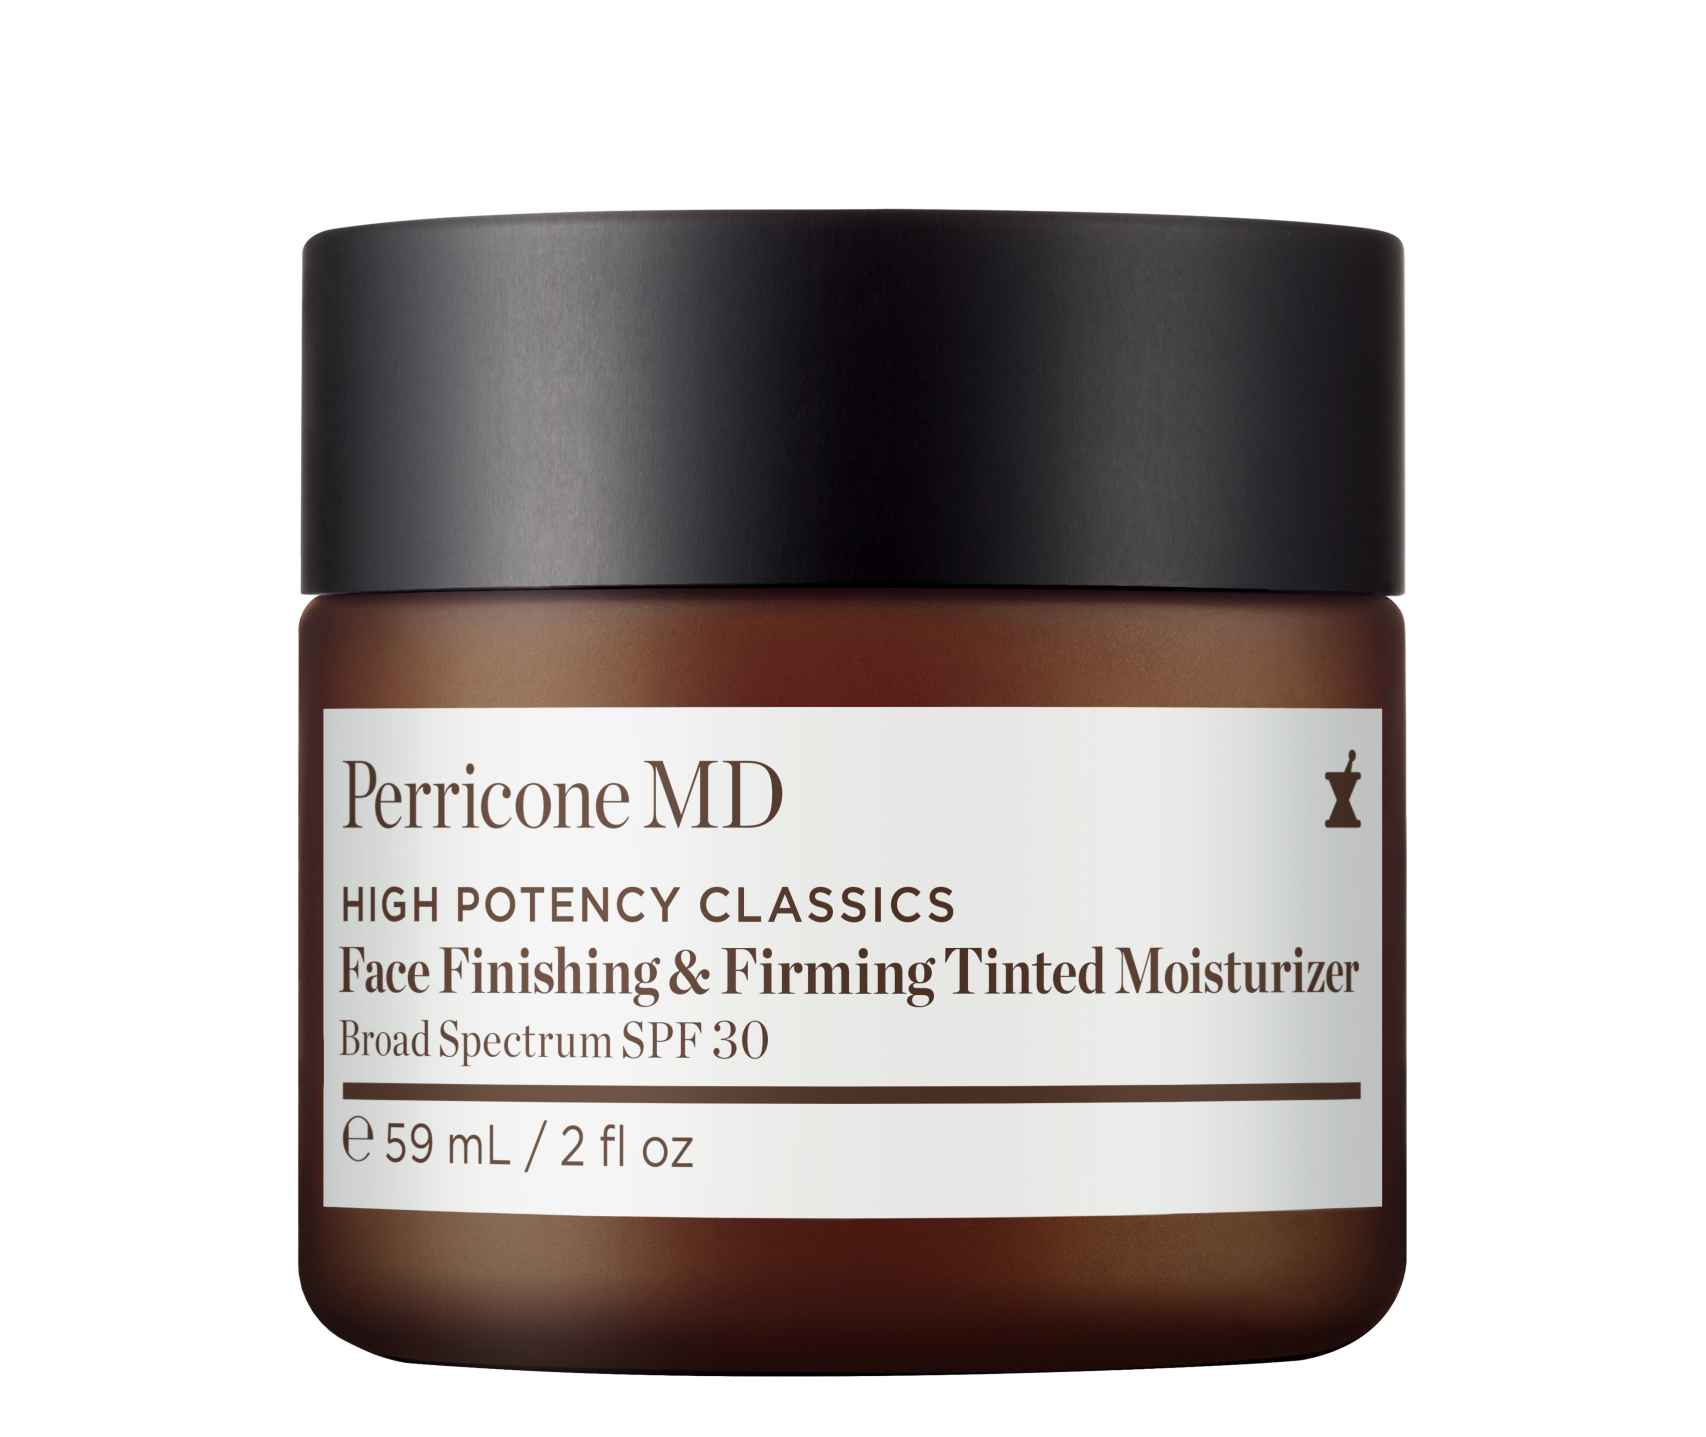 Face Finishing & Firming Tinted Moisturizer, de Perricone MD (82€).